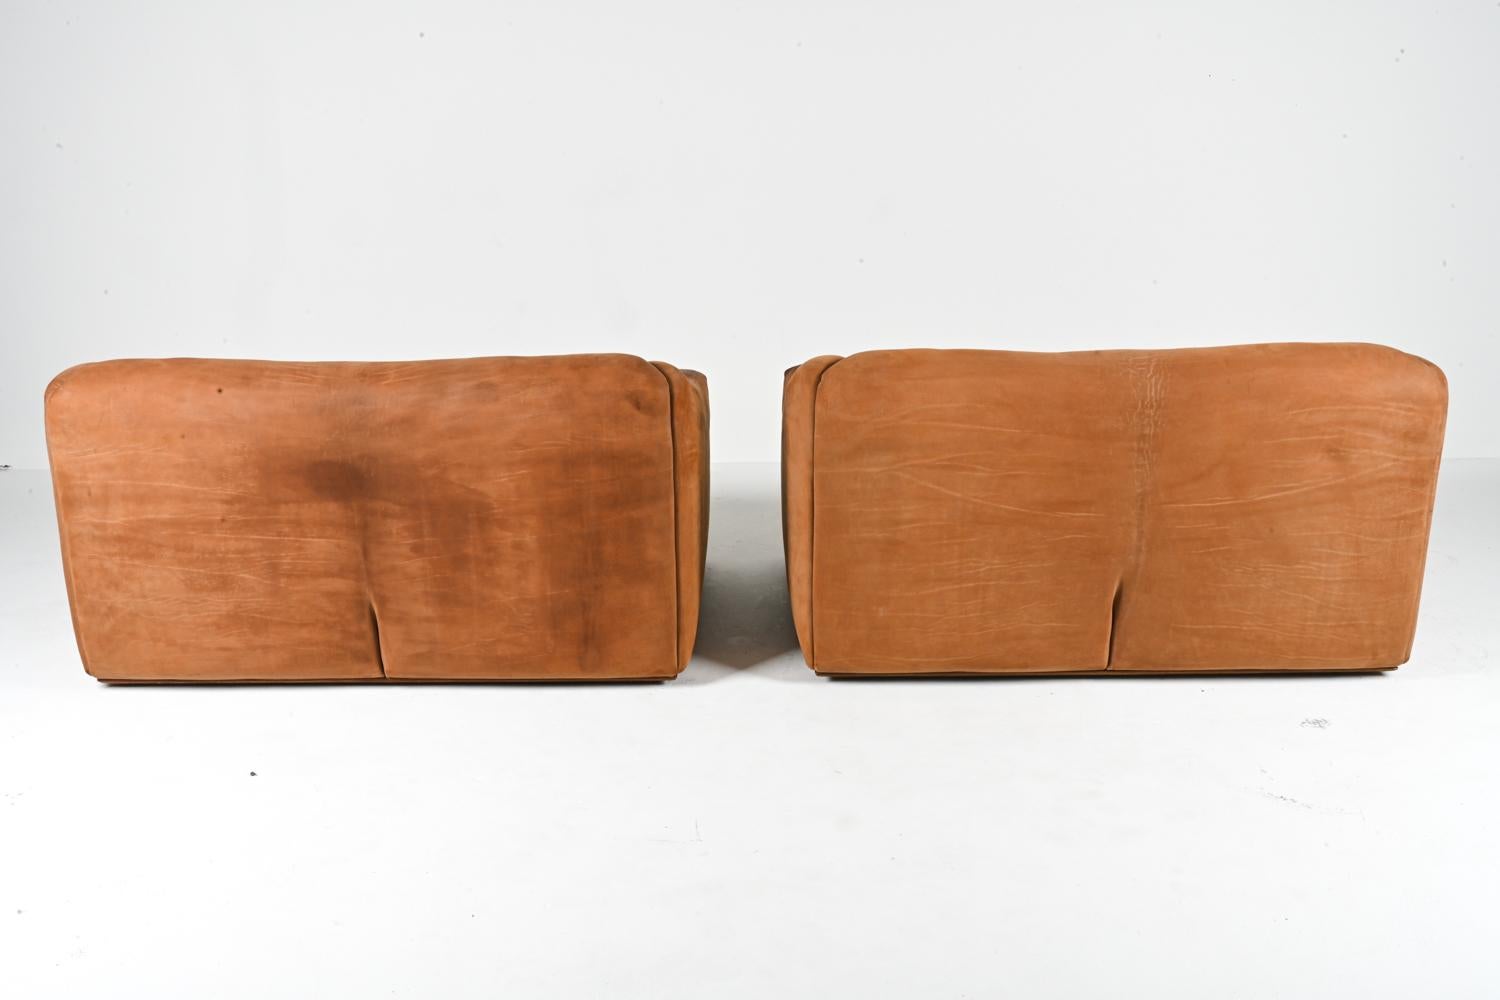 Pair of De Sede DS-47 Two-Seat Sofas in Nubuck Leather, c. 1970's For Sale 9